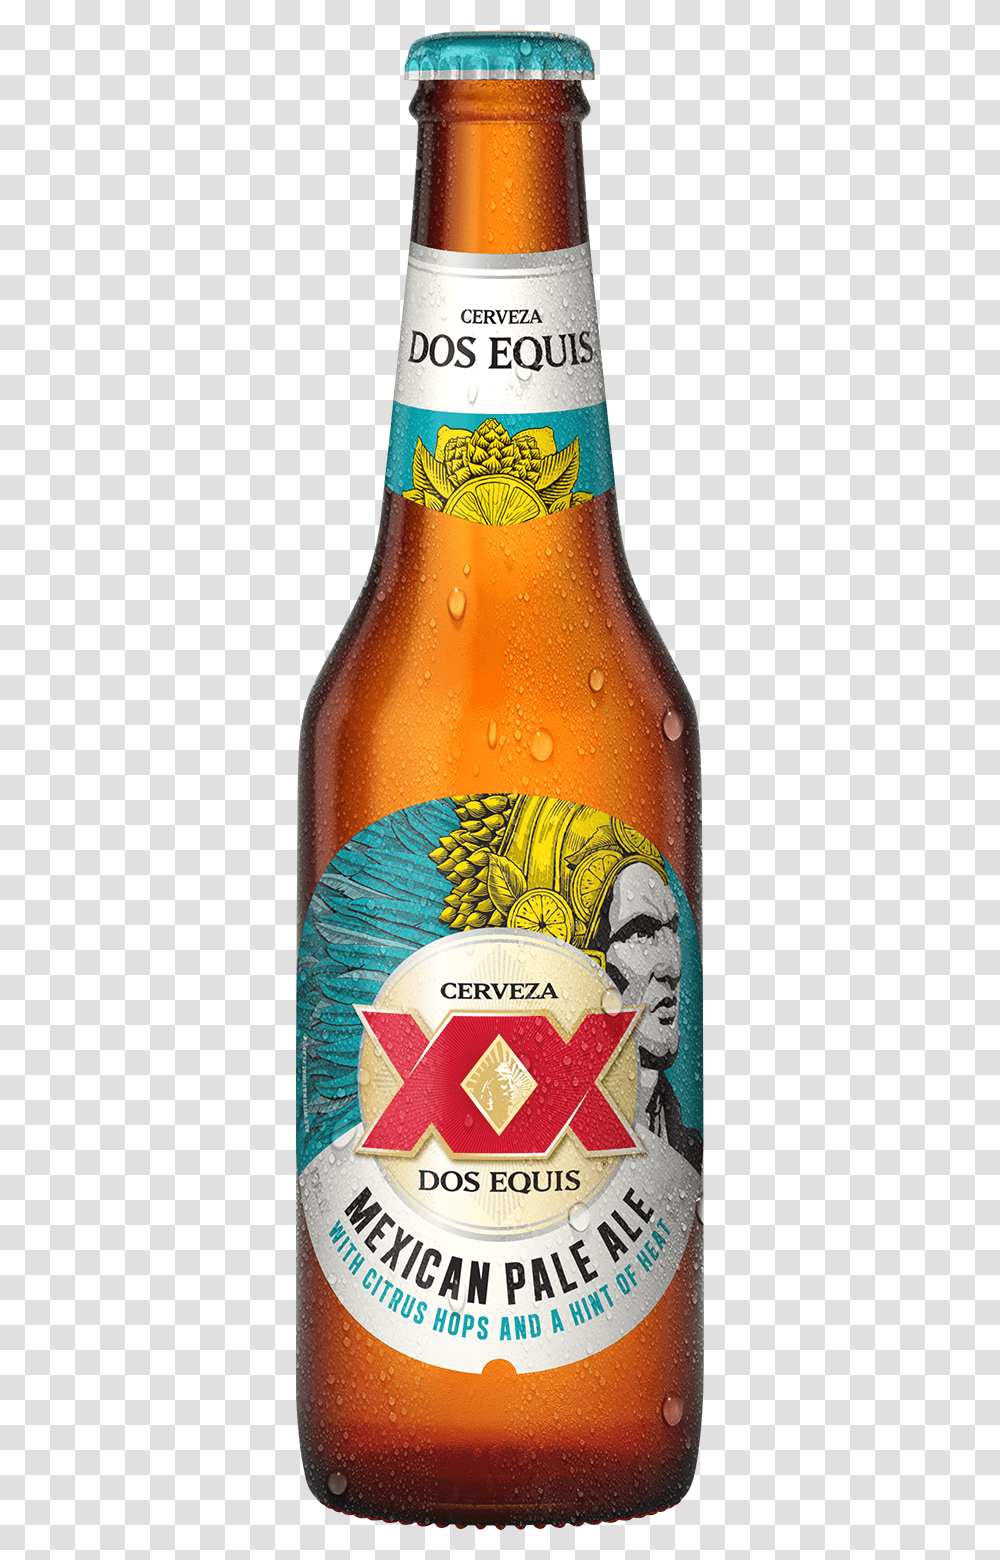 Dos Equis Mpa Dos X Mexican Pale Ale, Beer, Alcohol, Beverage, Drink Transparent Png